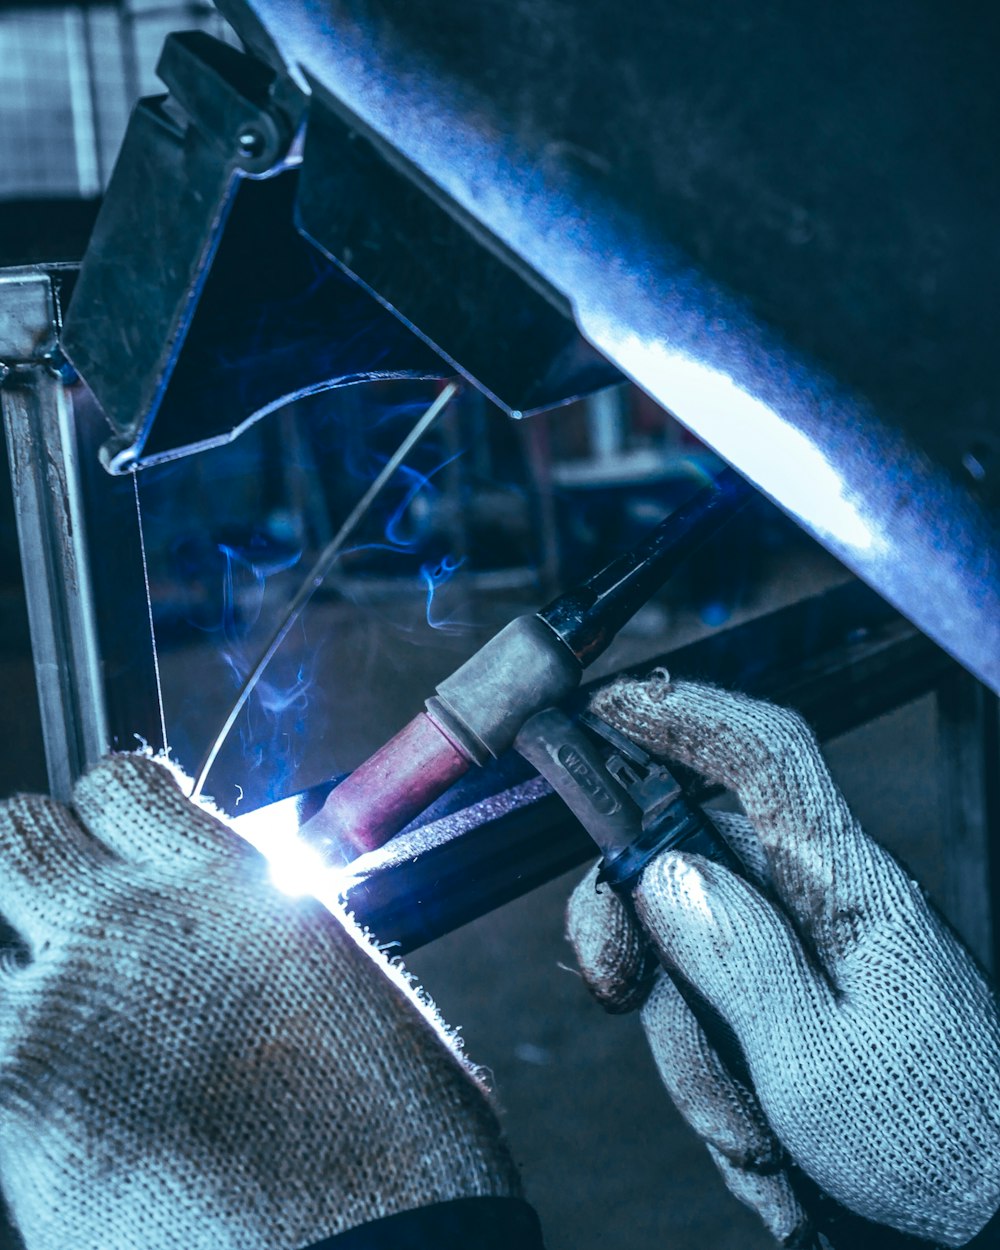 welder working on a piece of metal in a factory